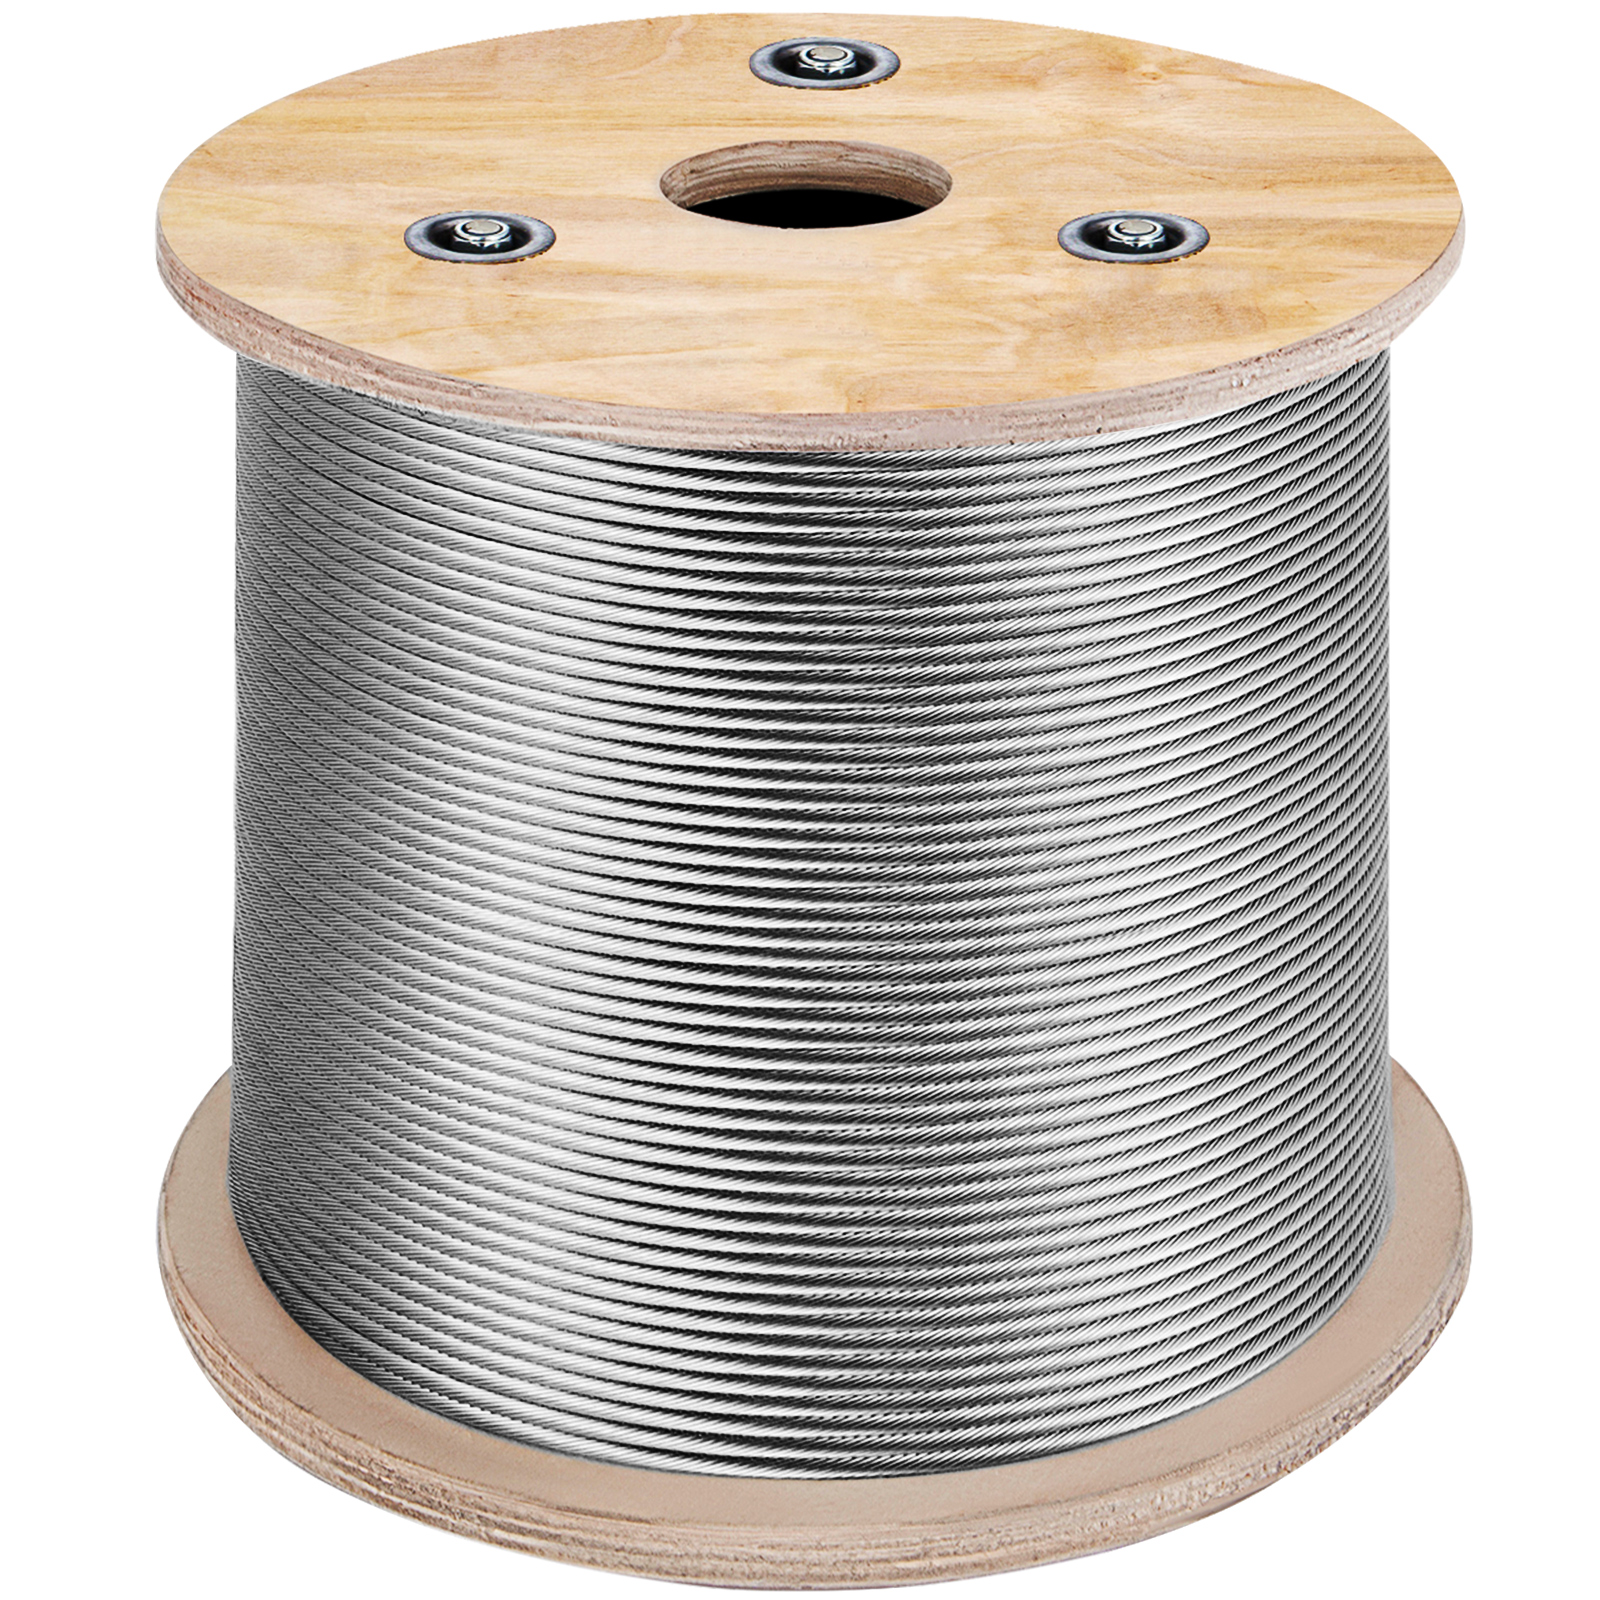 1/8" 100ft 7x7 Cable Railing T316 Stainless Steel Wire Rope Cable Strand 